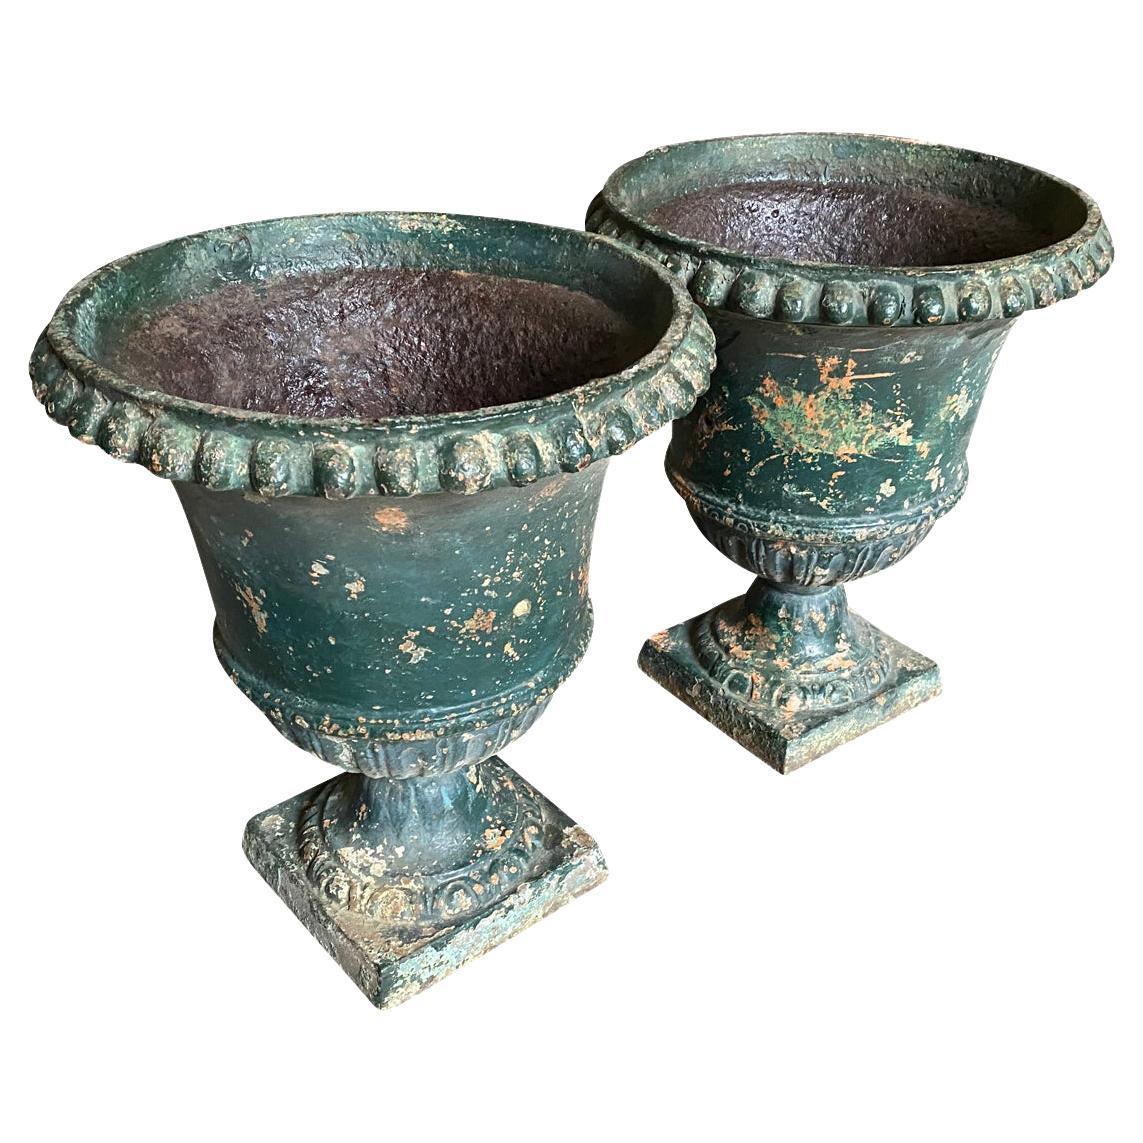 Pair Of French 18th Century Medici Urns 